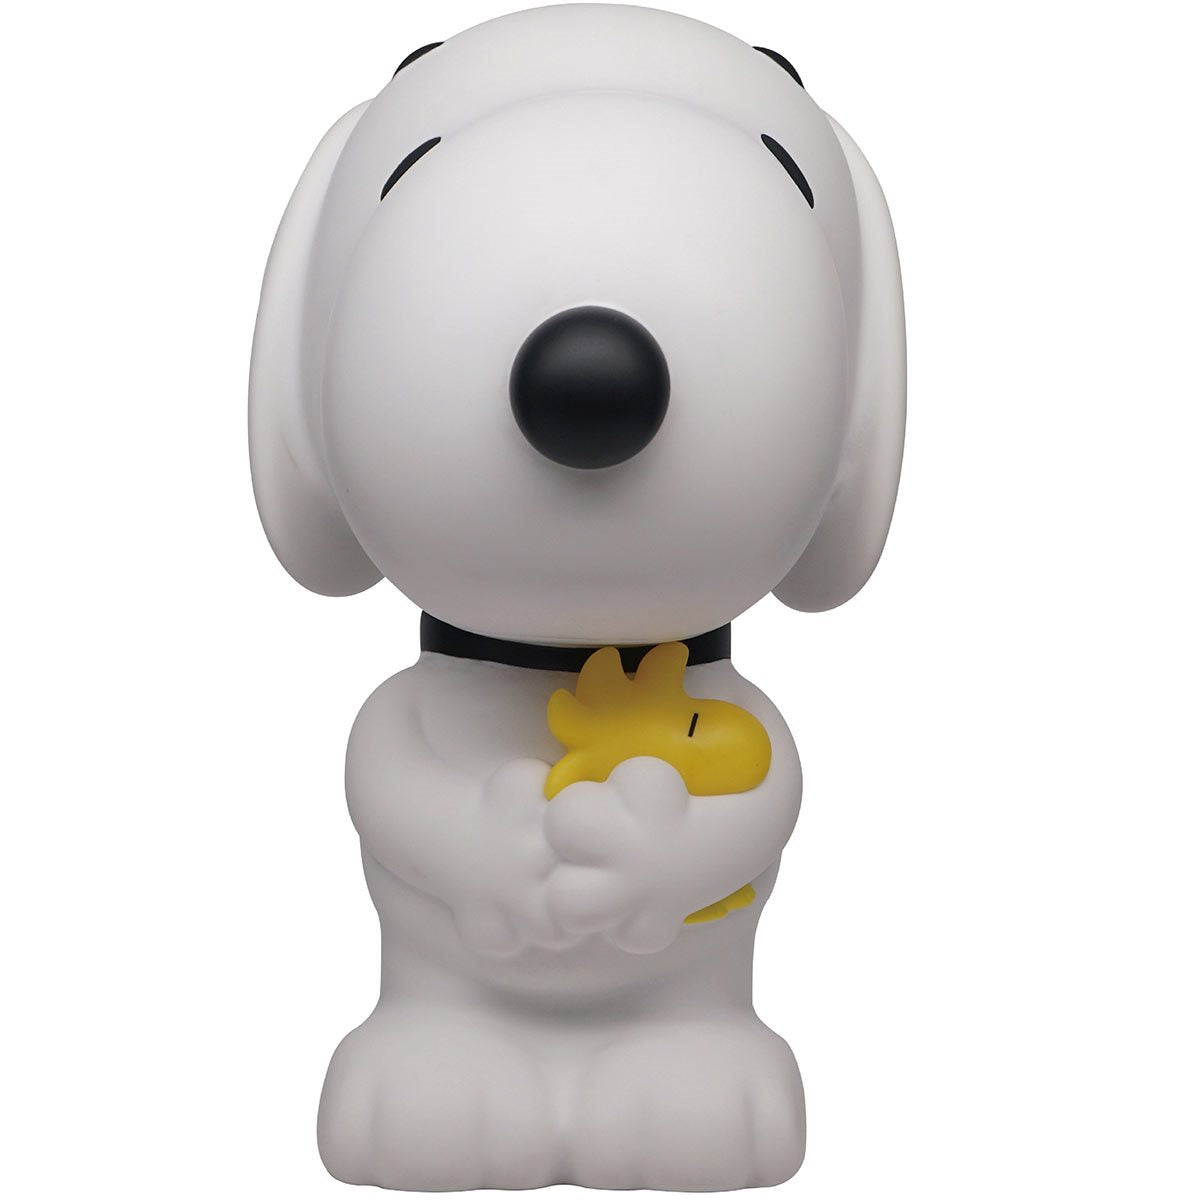 Peanuts Snoopy Holding Woodstock - Figural PVC Bust Bank